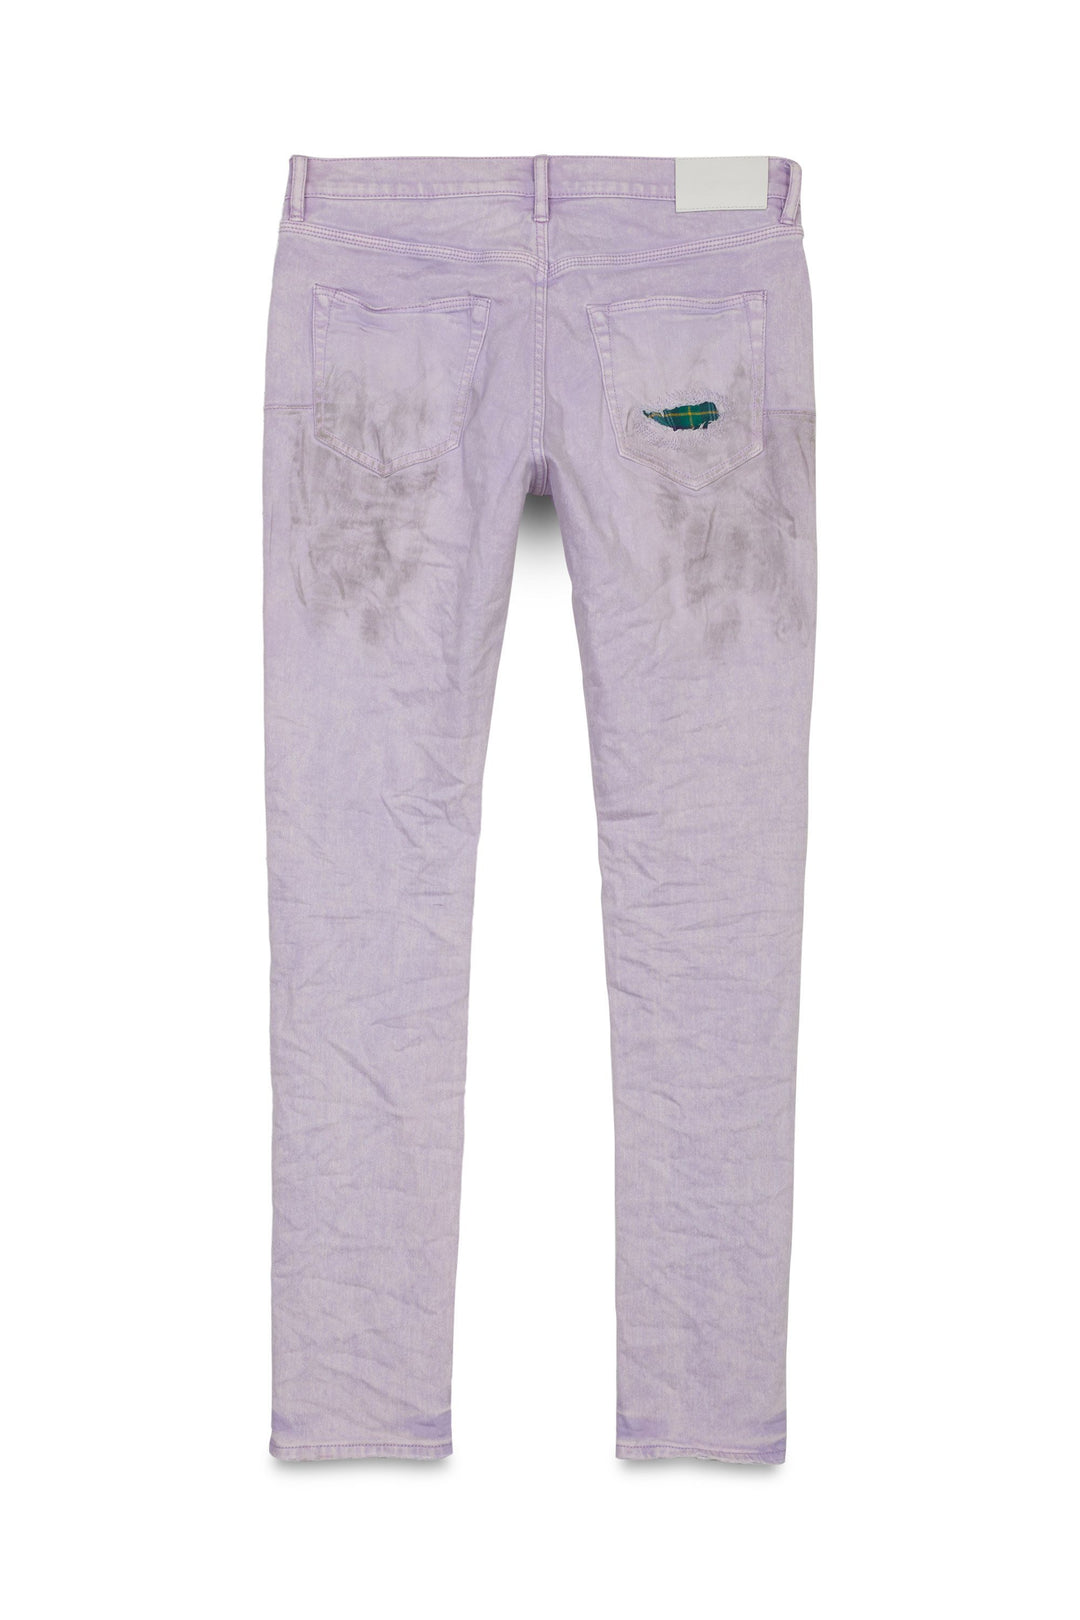 Purple Brand P001 Low Rise Skinny Jeans - Lavender Heavy Repair with Plaid Patch